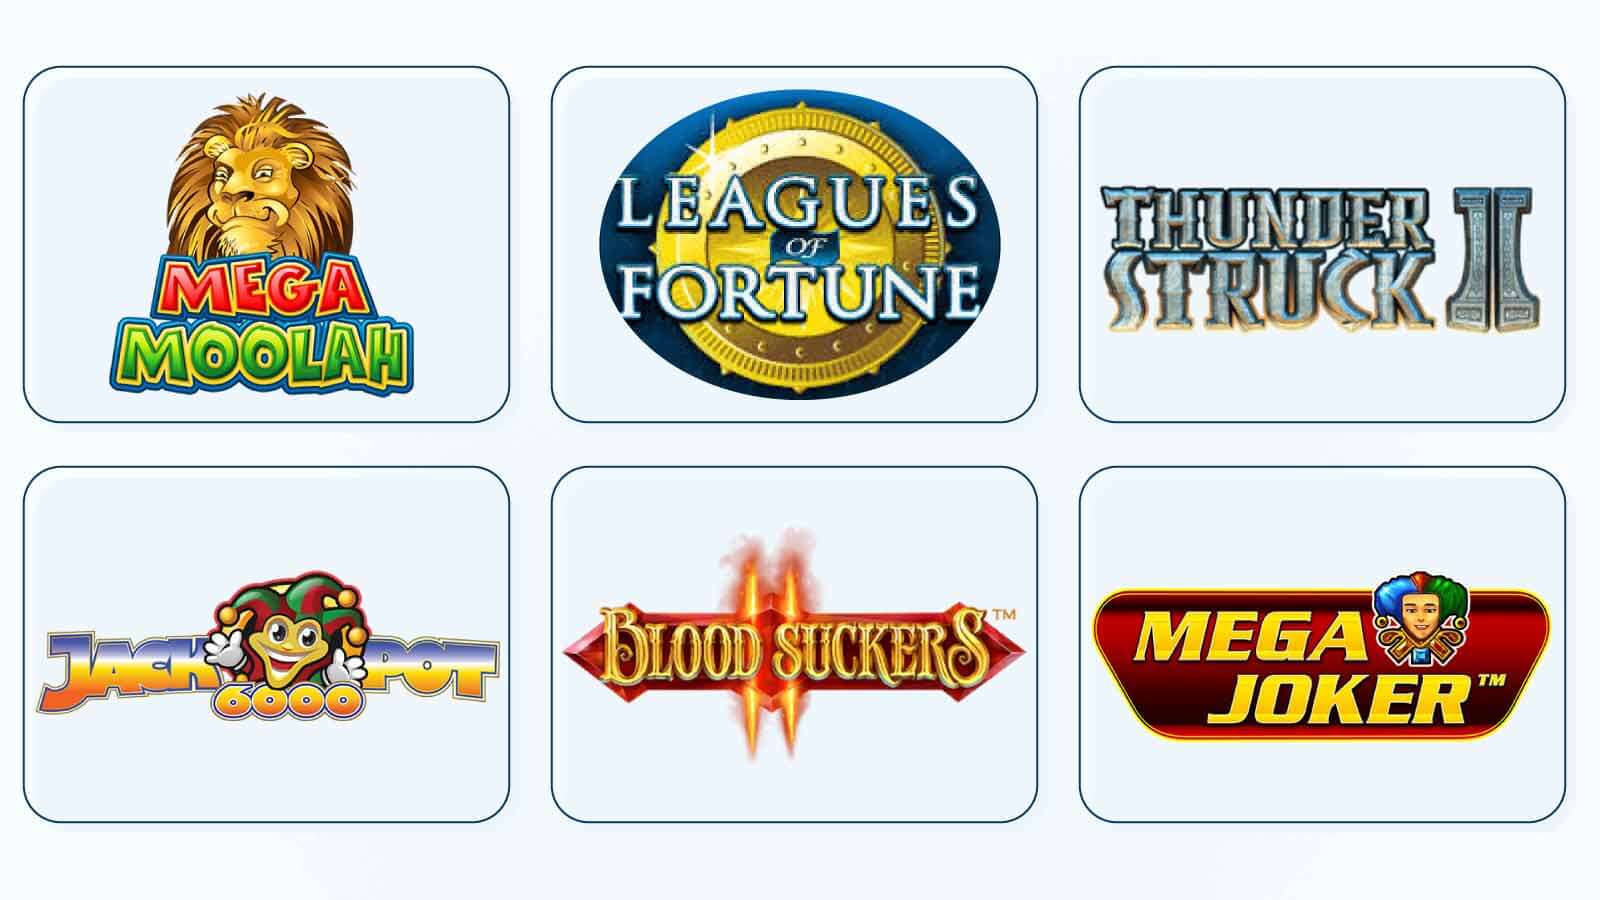 More games you can play at C$1 deposit casino Canada